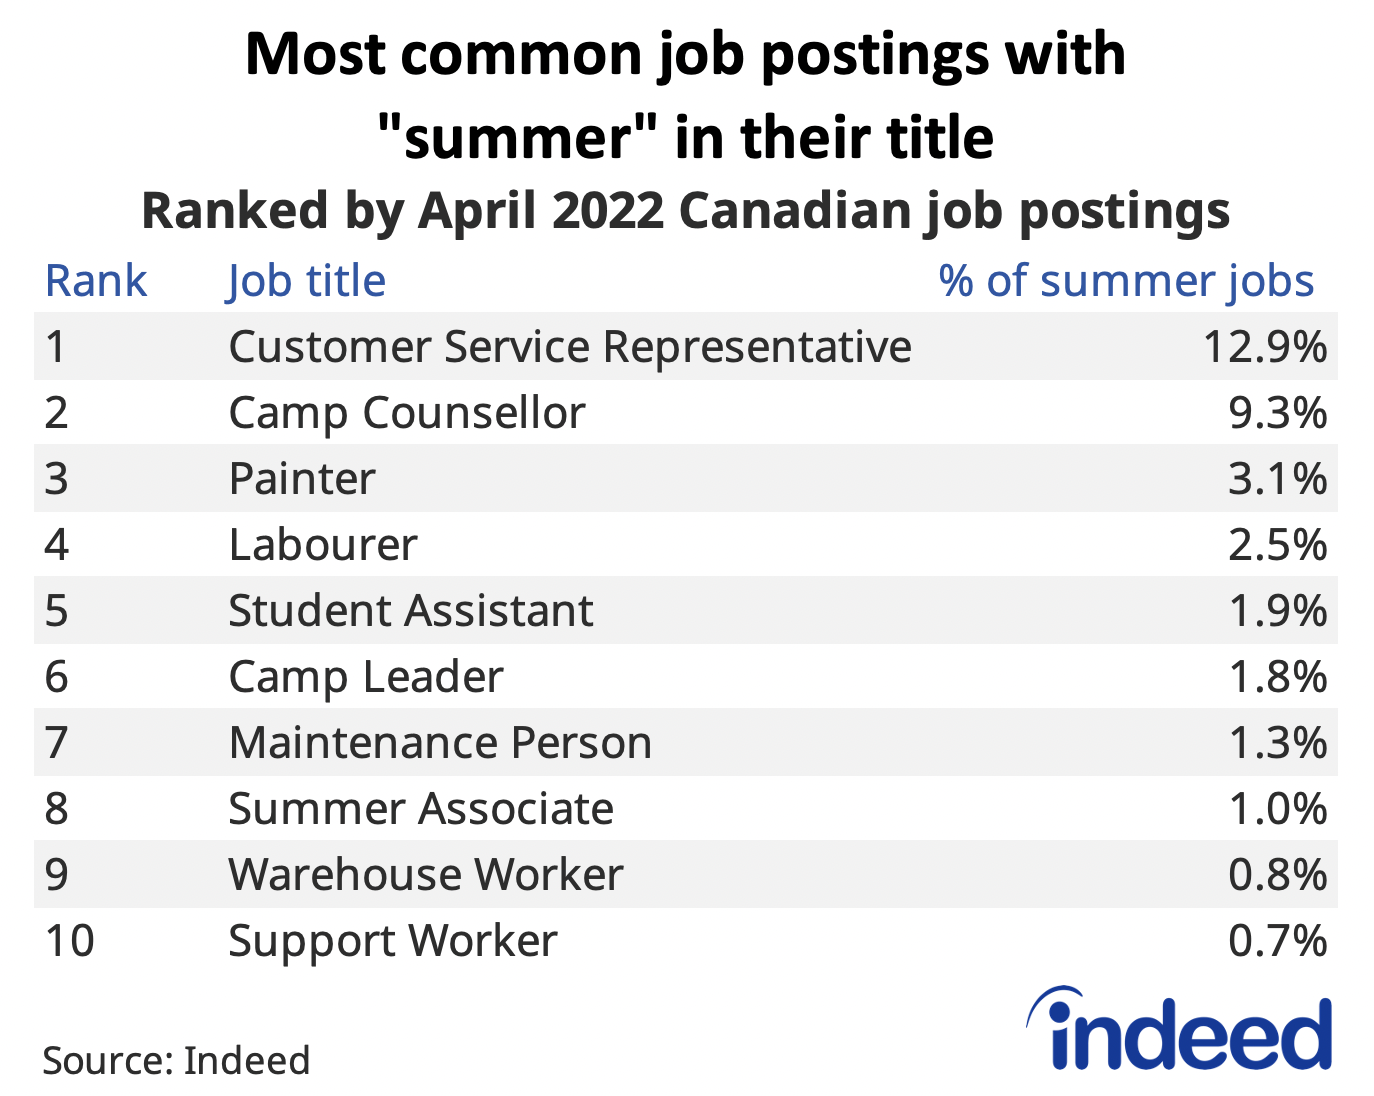 Table titled “Most common job postings with summer in their title”,